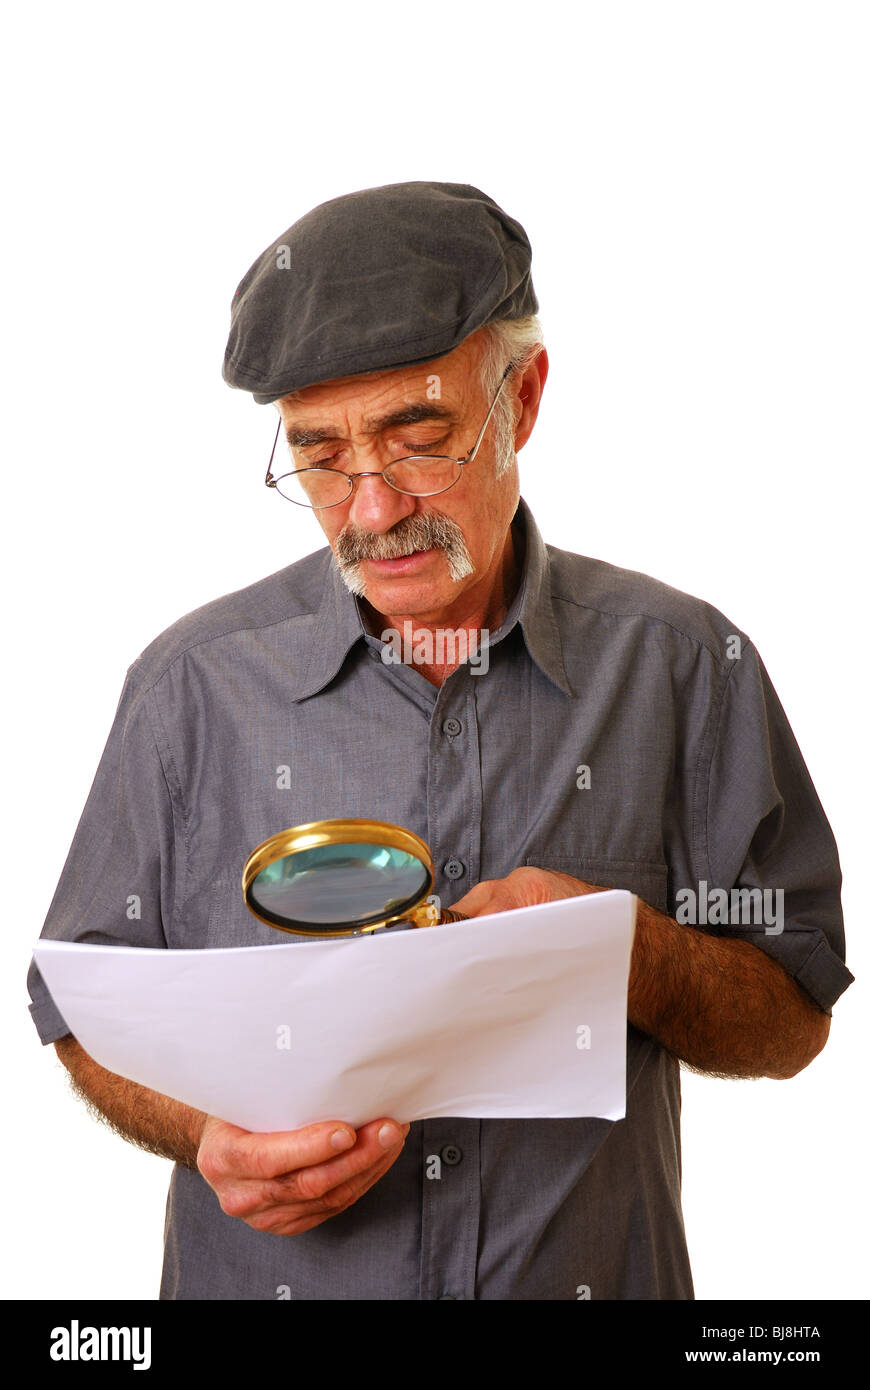 Elderly Man Using Glasses And Magnifying Glass To Read Small Print